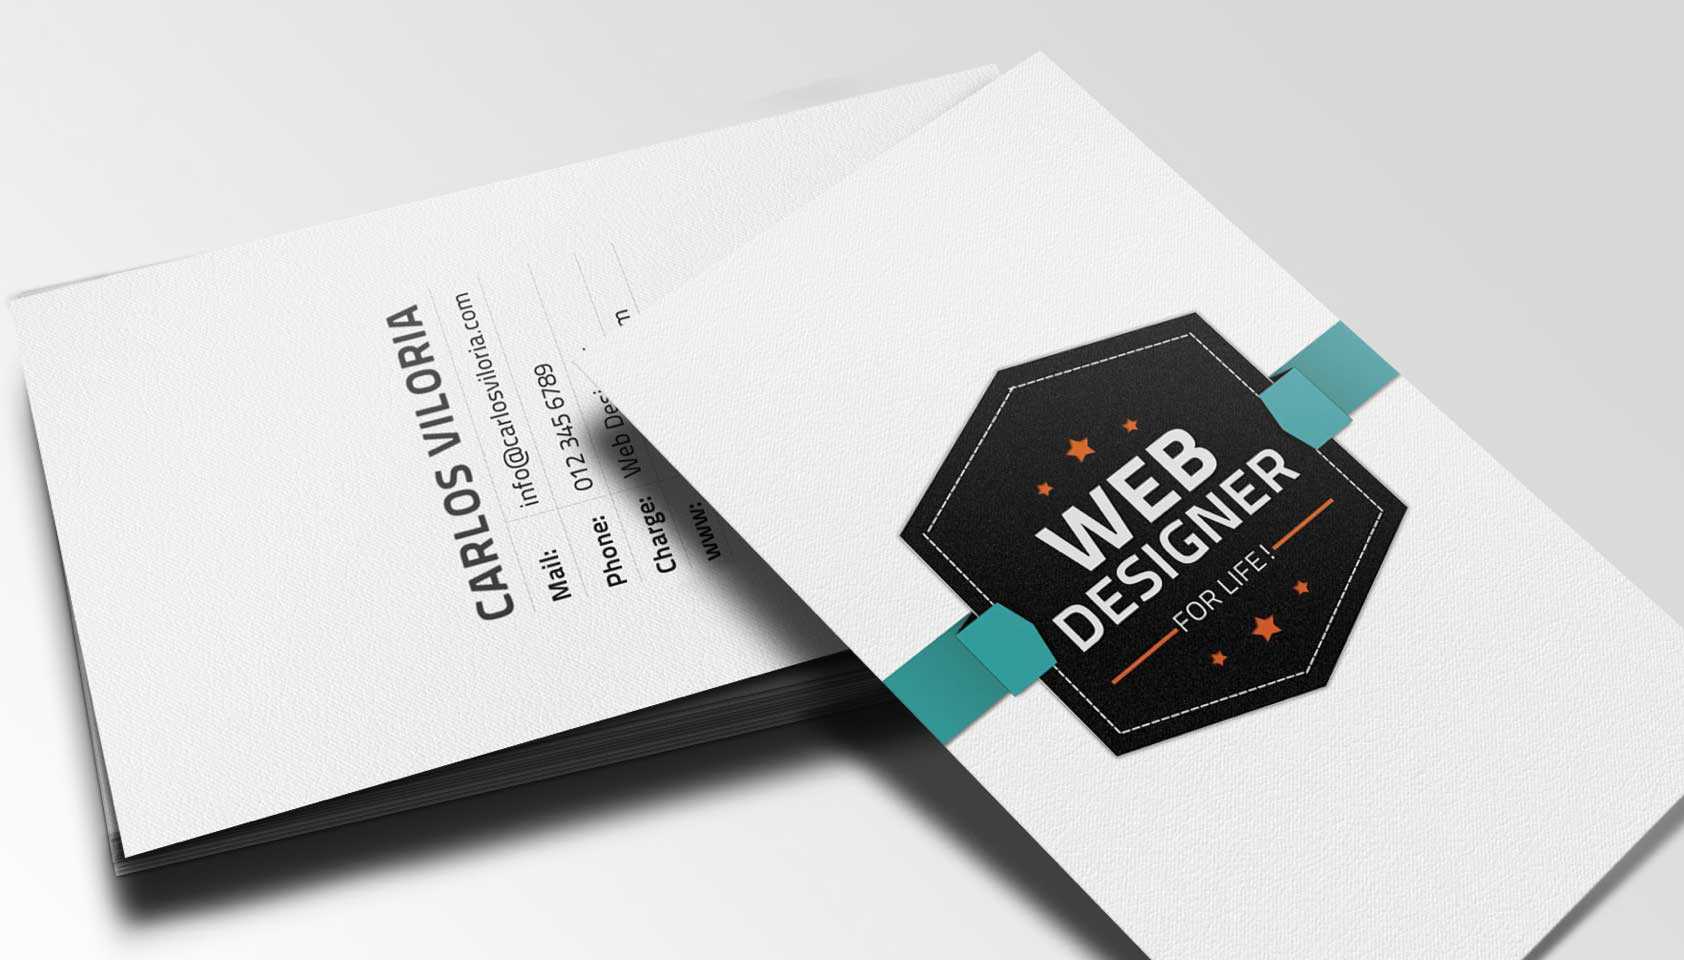 Free Download: Retro Business Card Psd | Webdesigner Depot With Web Design Business Cards Templates